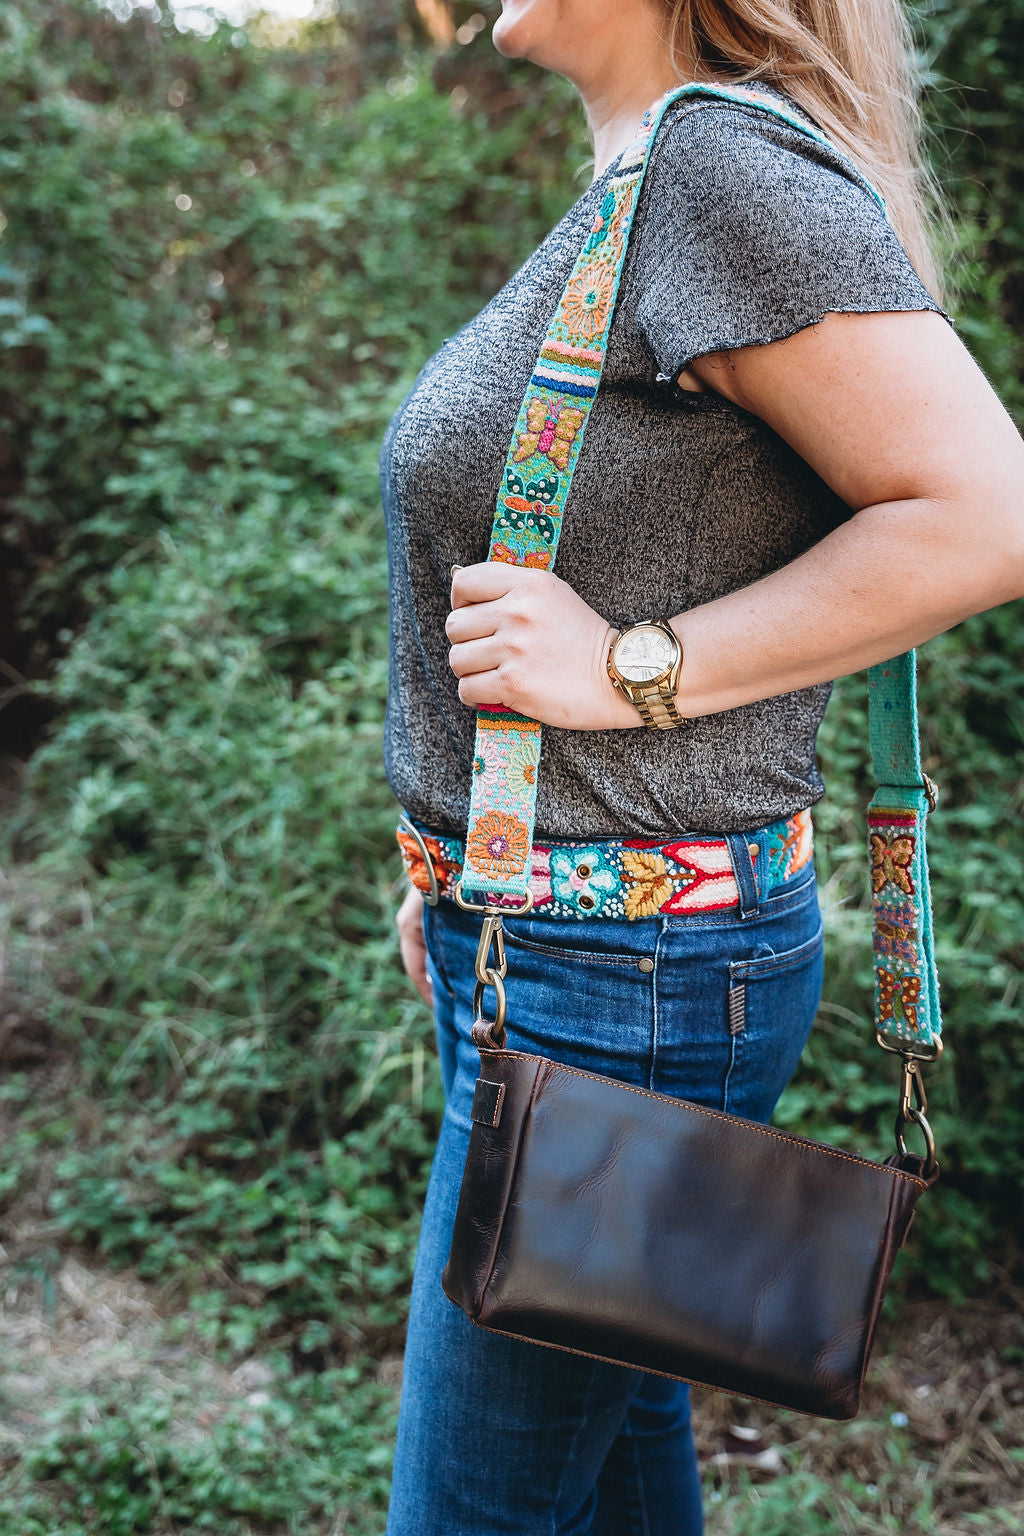 A woman wearing the butterfly adjustable strap purse attached to a brown leather fair trade purse in an outdoor setting.